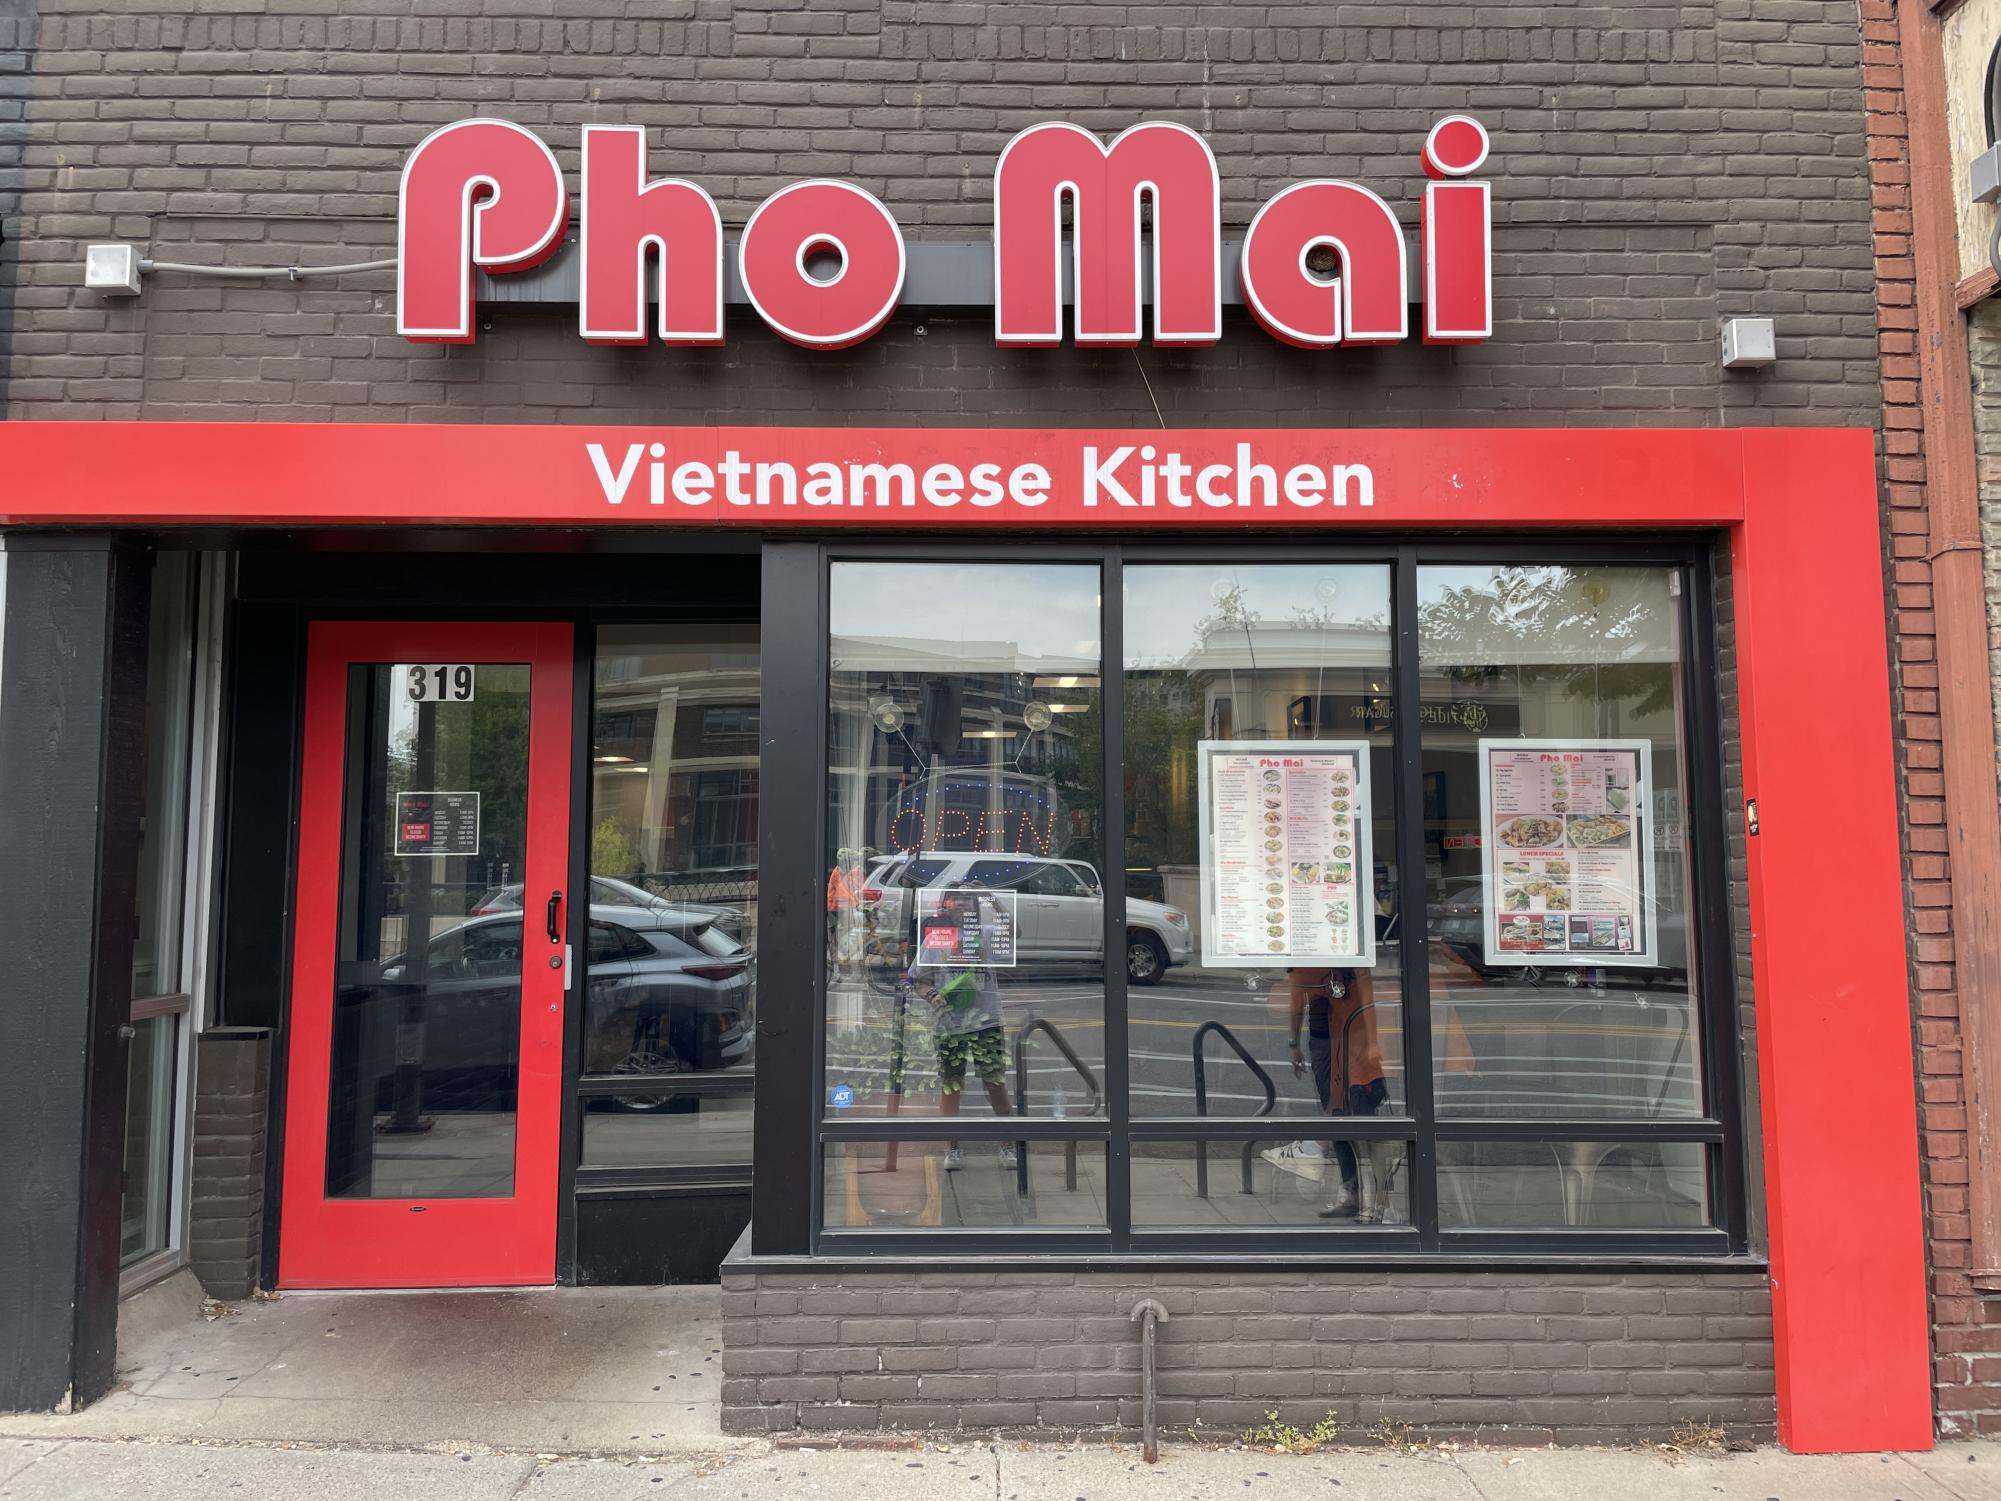 
Pho Mai : The Dinkytown resturant features a wide array of menu options